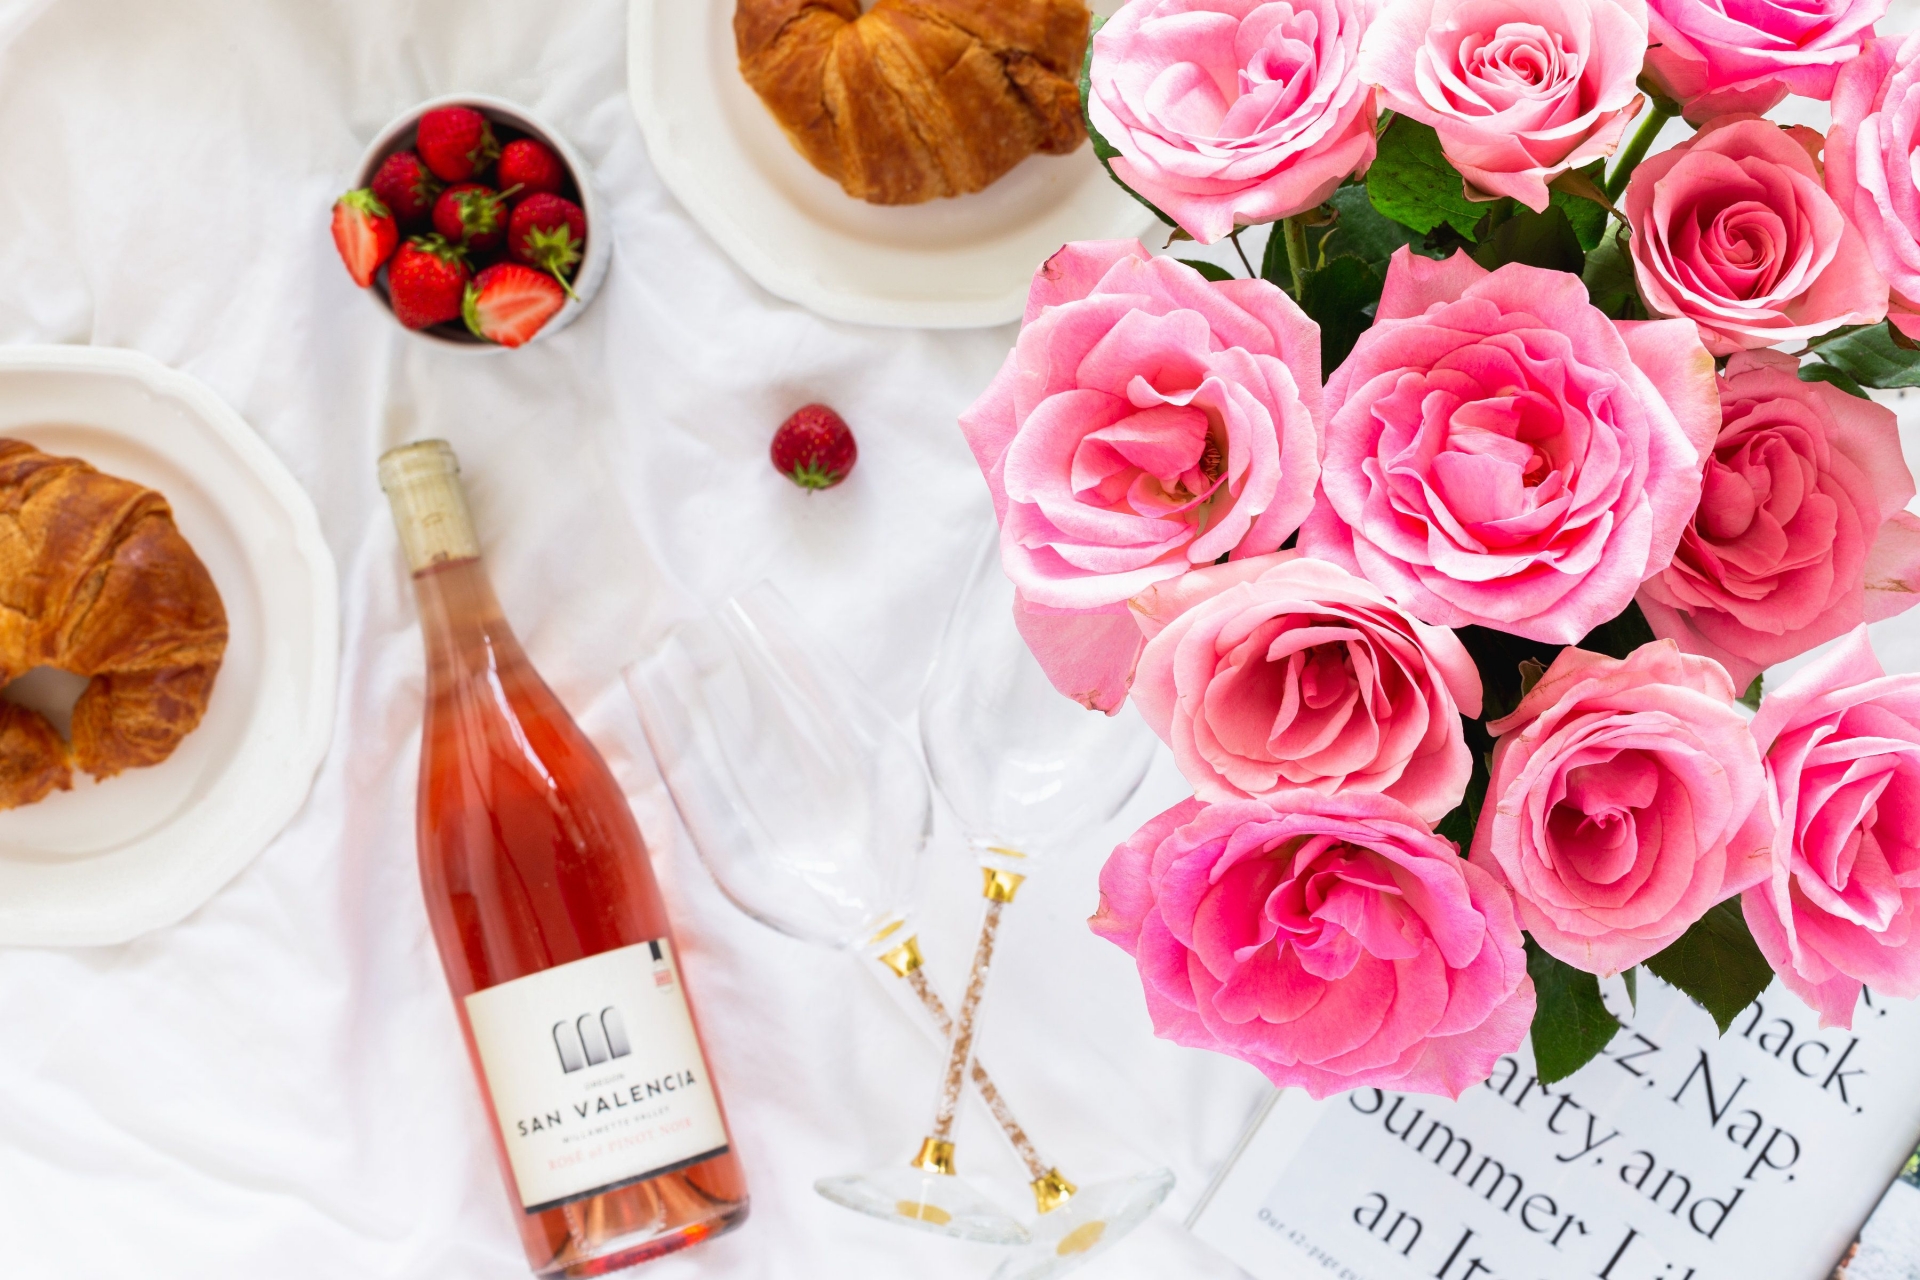 Top 10 Rose Wines That Should Drink At Least Once in Your Life